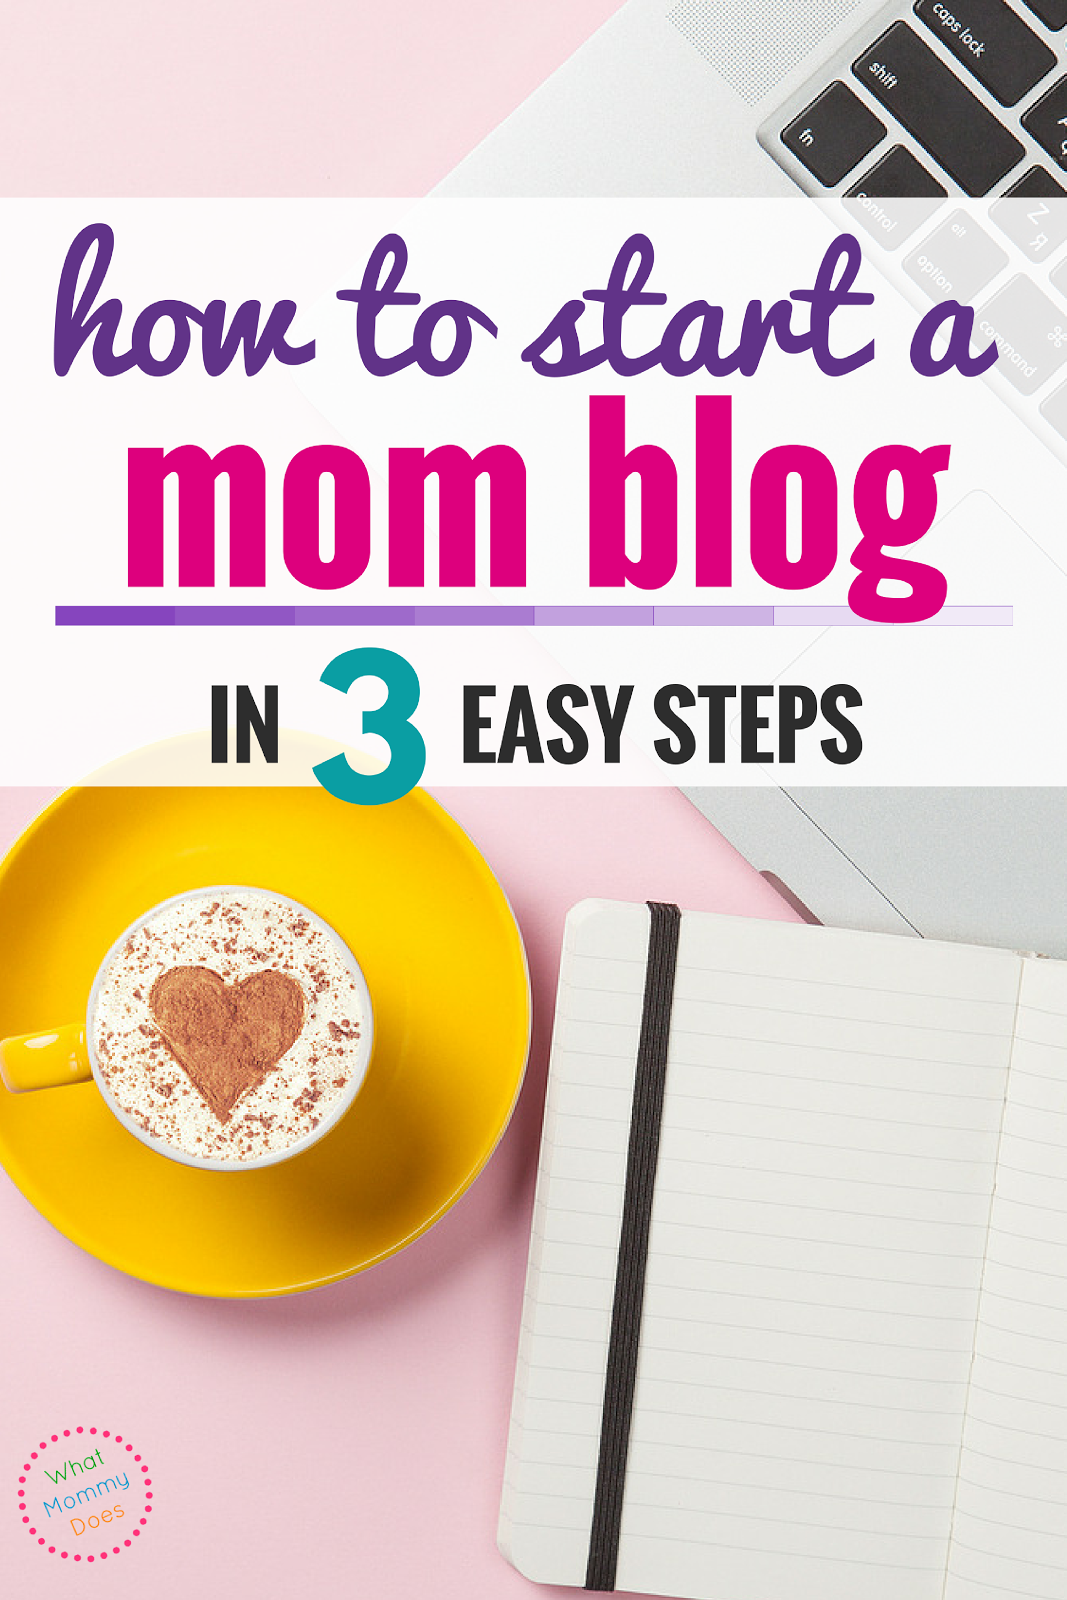 Learn how to start a blog in three easy steps. You can get started on WordPress to make money blogging!